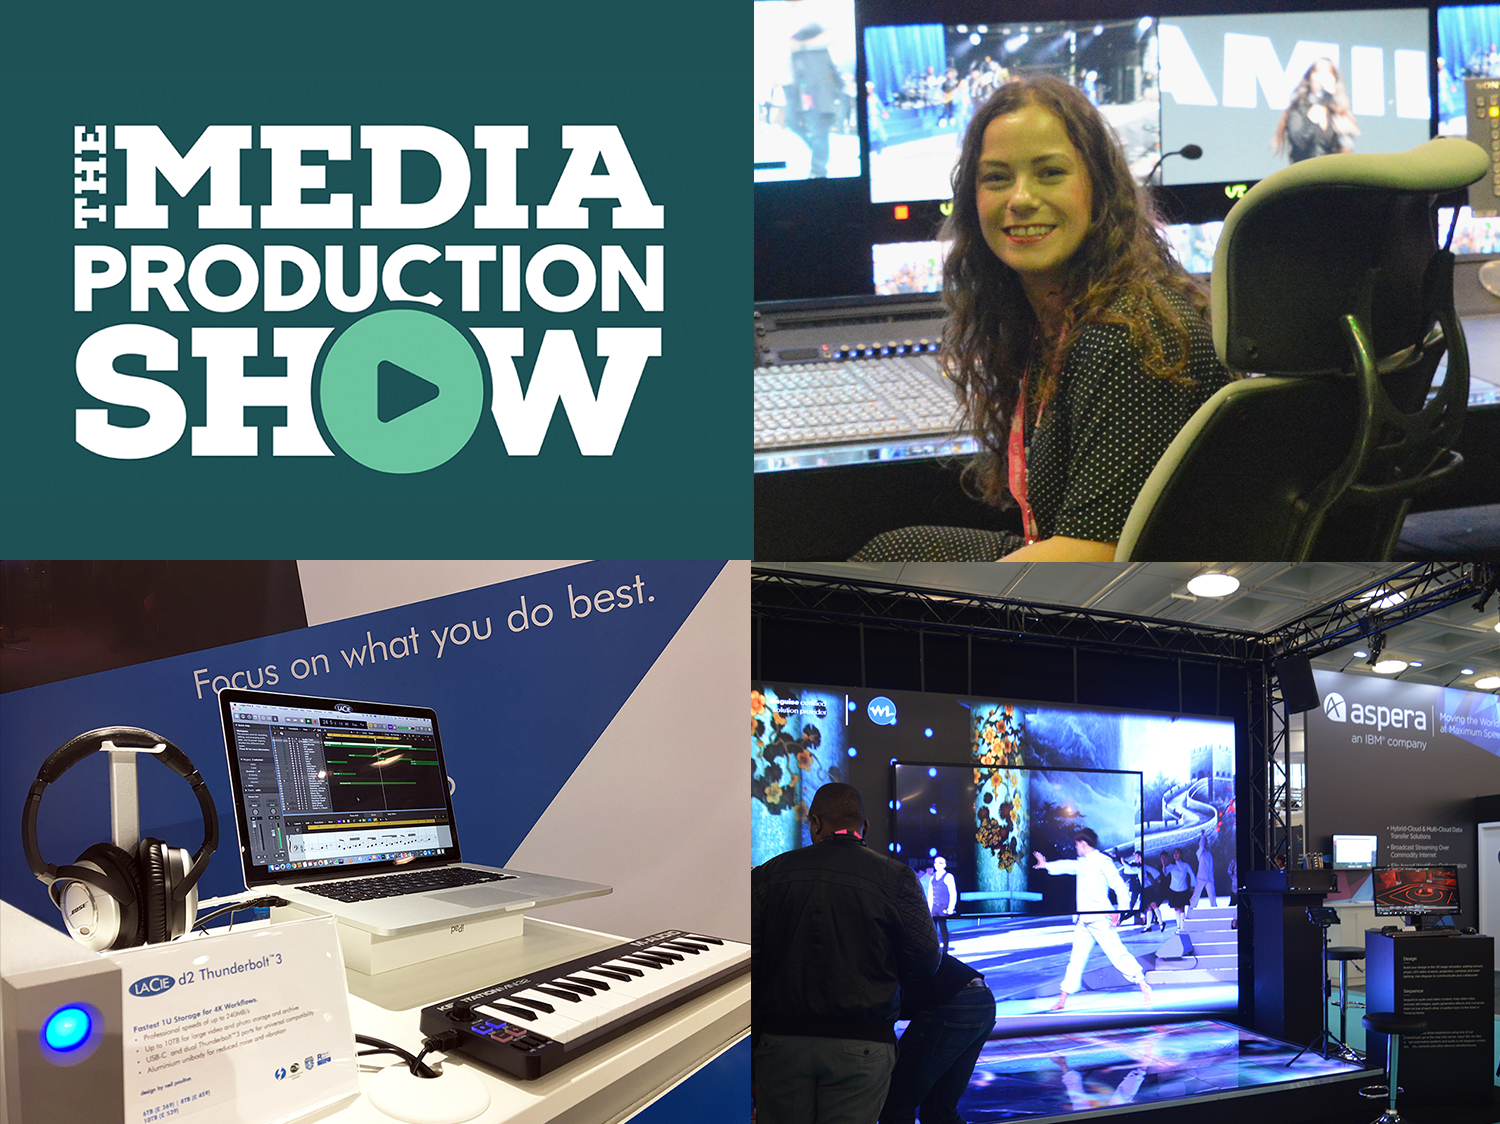 Editing tips from The Media Production Show 2018